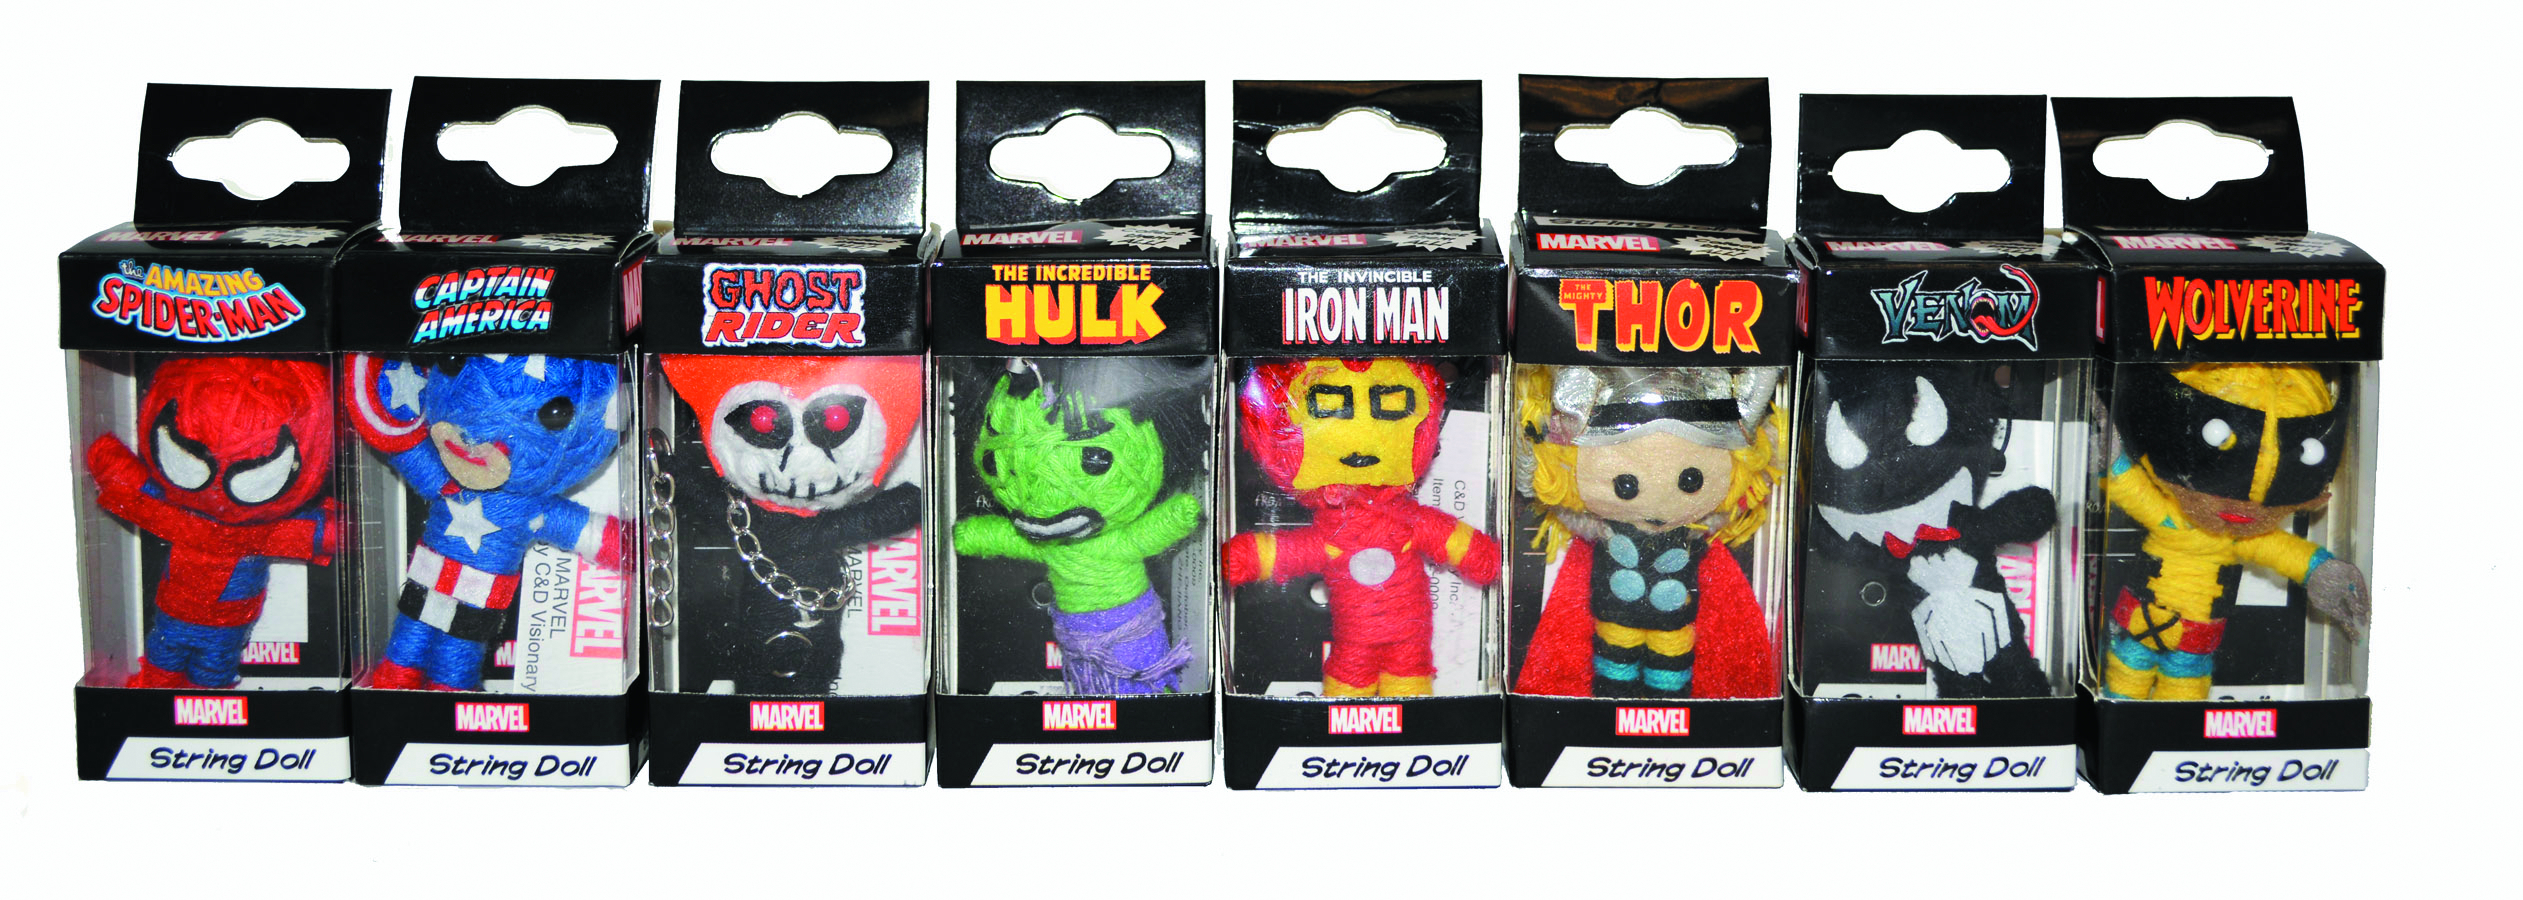 Assorted Marvel Characters Decal Kit